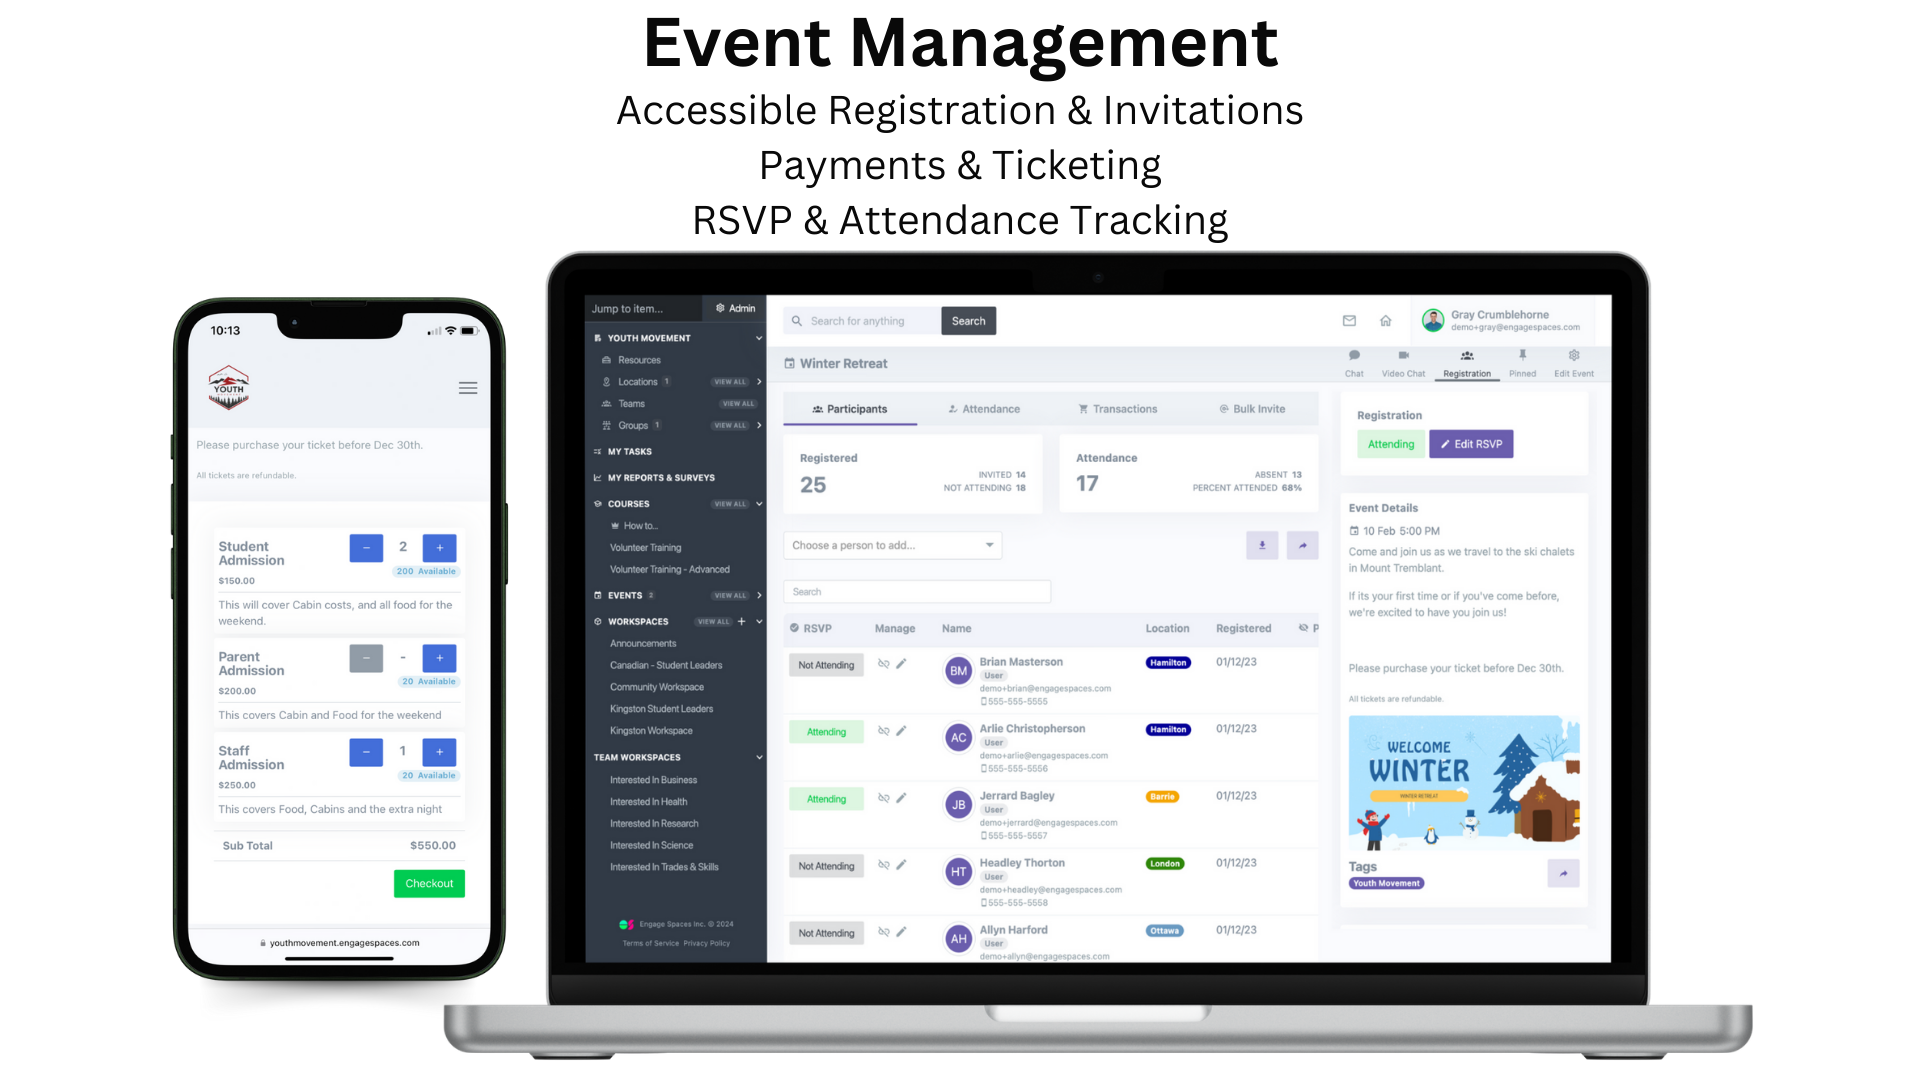 Engage the general public and your organization through your custom events. Control each events' price, ticket quantity, and availability. Share events across locations and grant certain Users access to coordinating and tracking custom events.